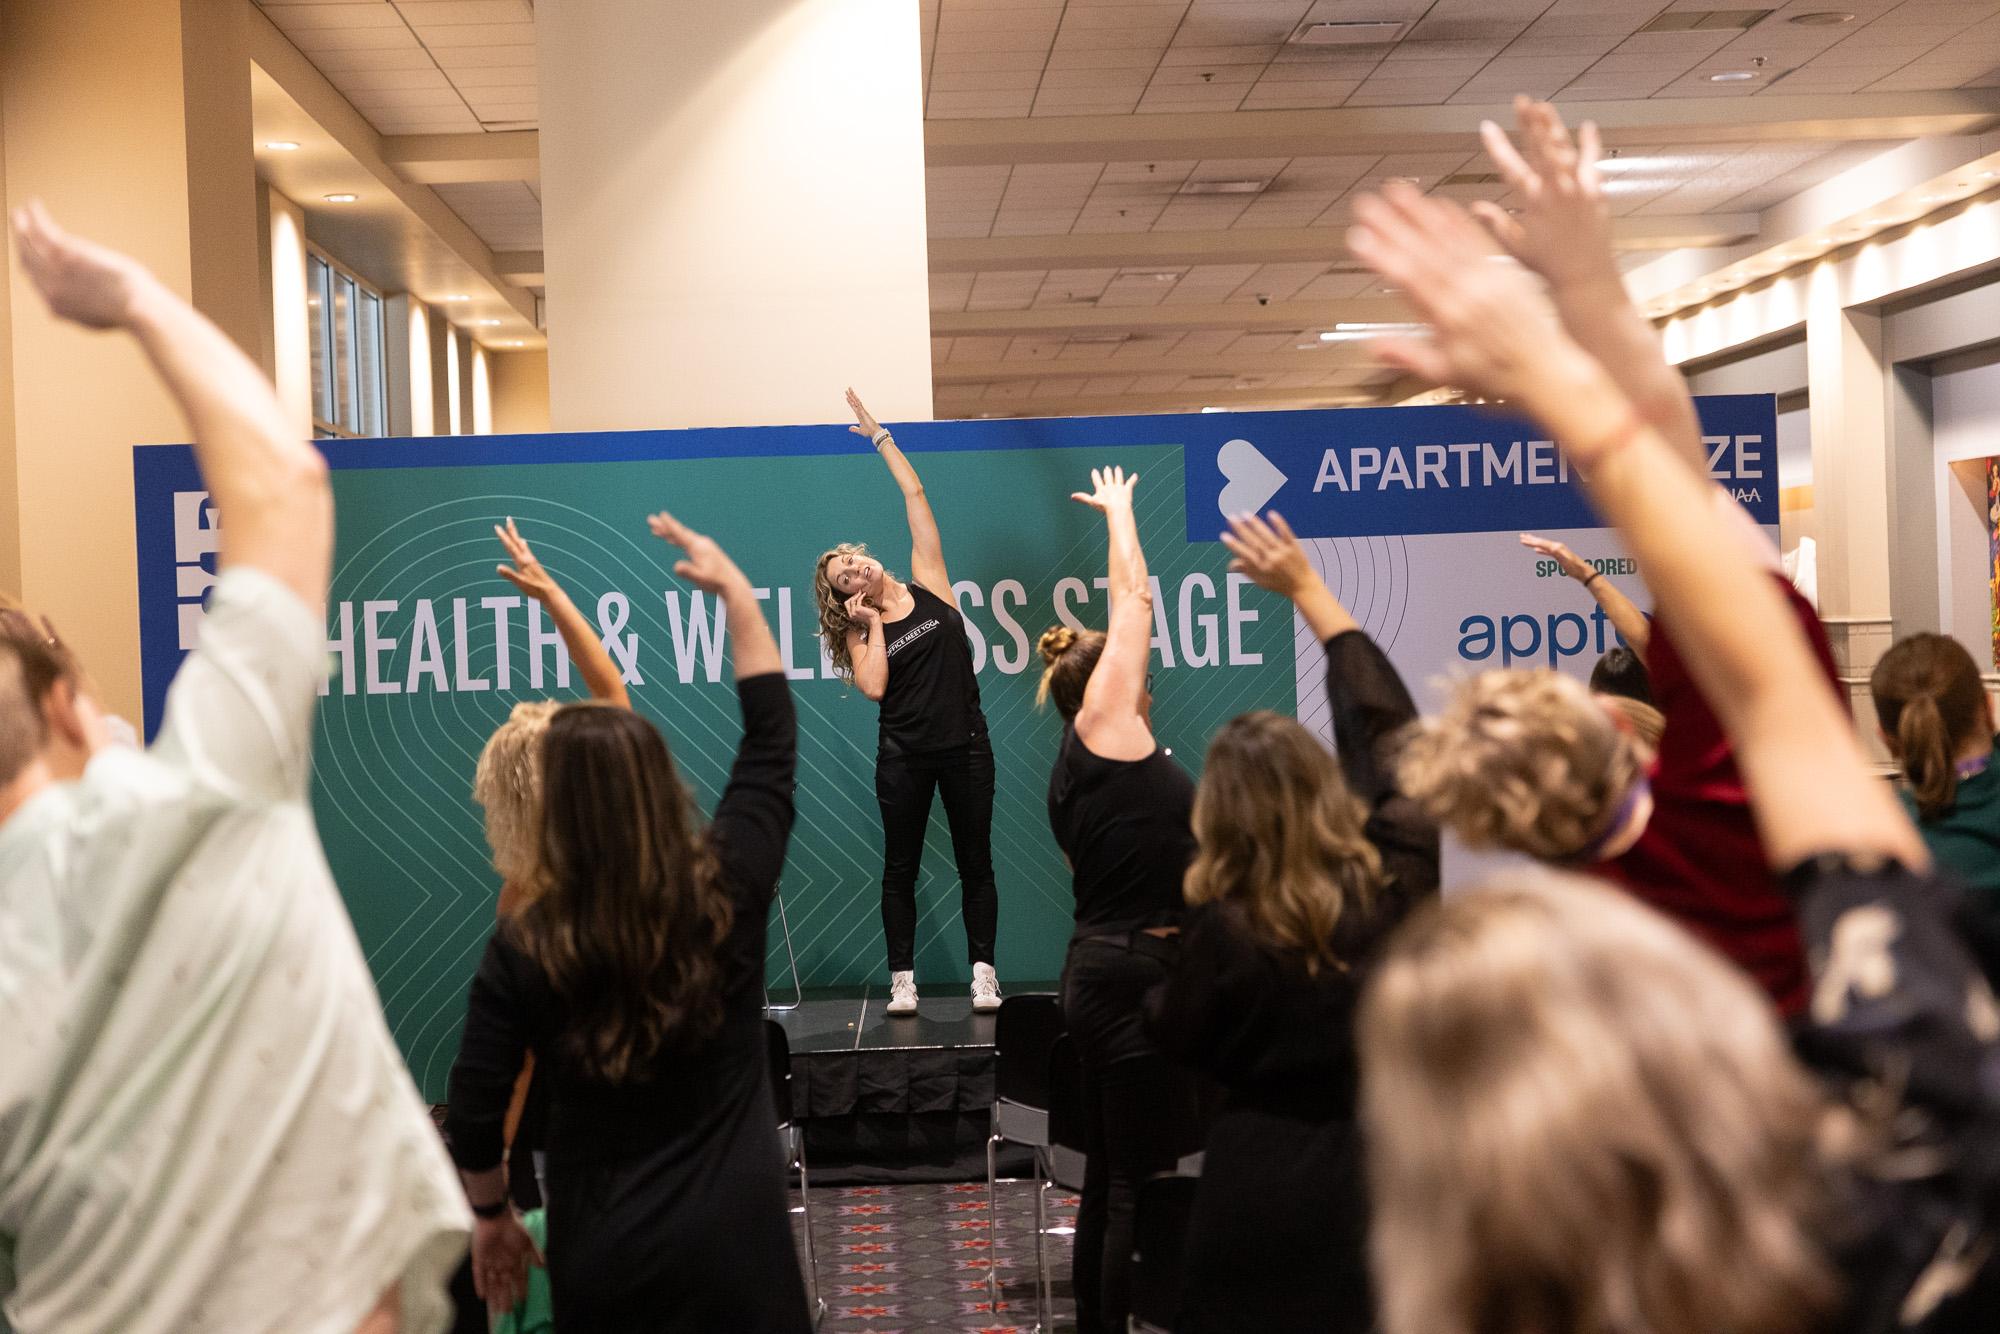 The Health and Wellness stage is a mainstay feature of Apartmentalize.